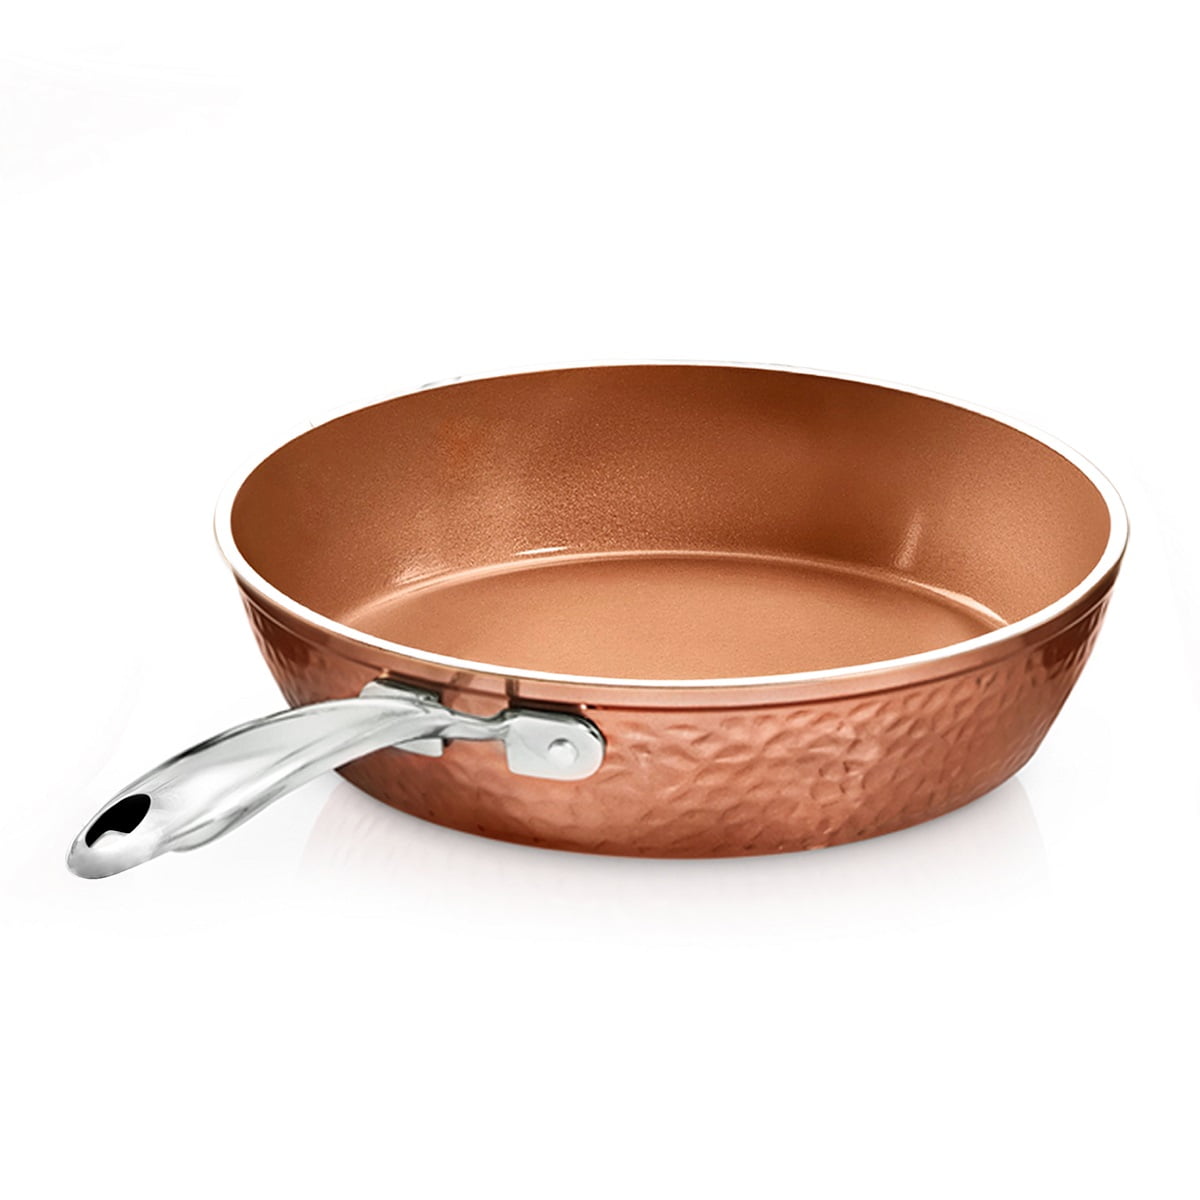 Handmade Pure Copper Saucepan For Frying Cooking Serving Dishes Fry Pan  Pot 